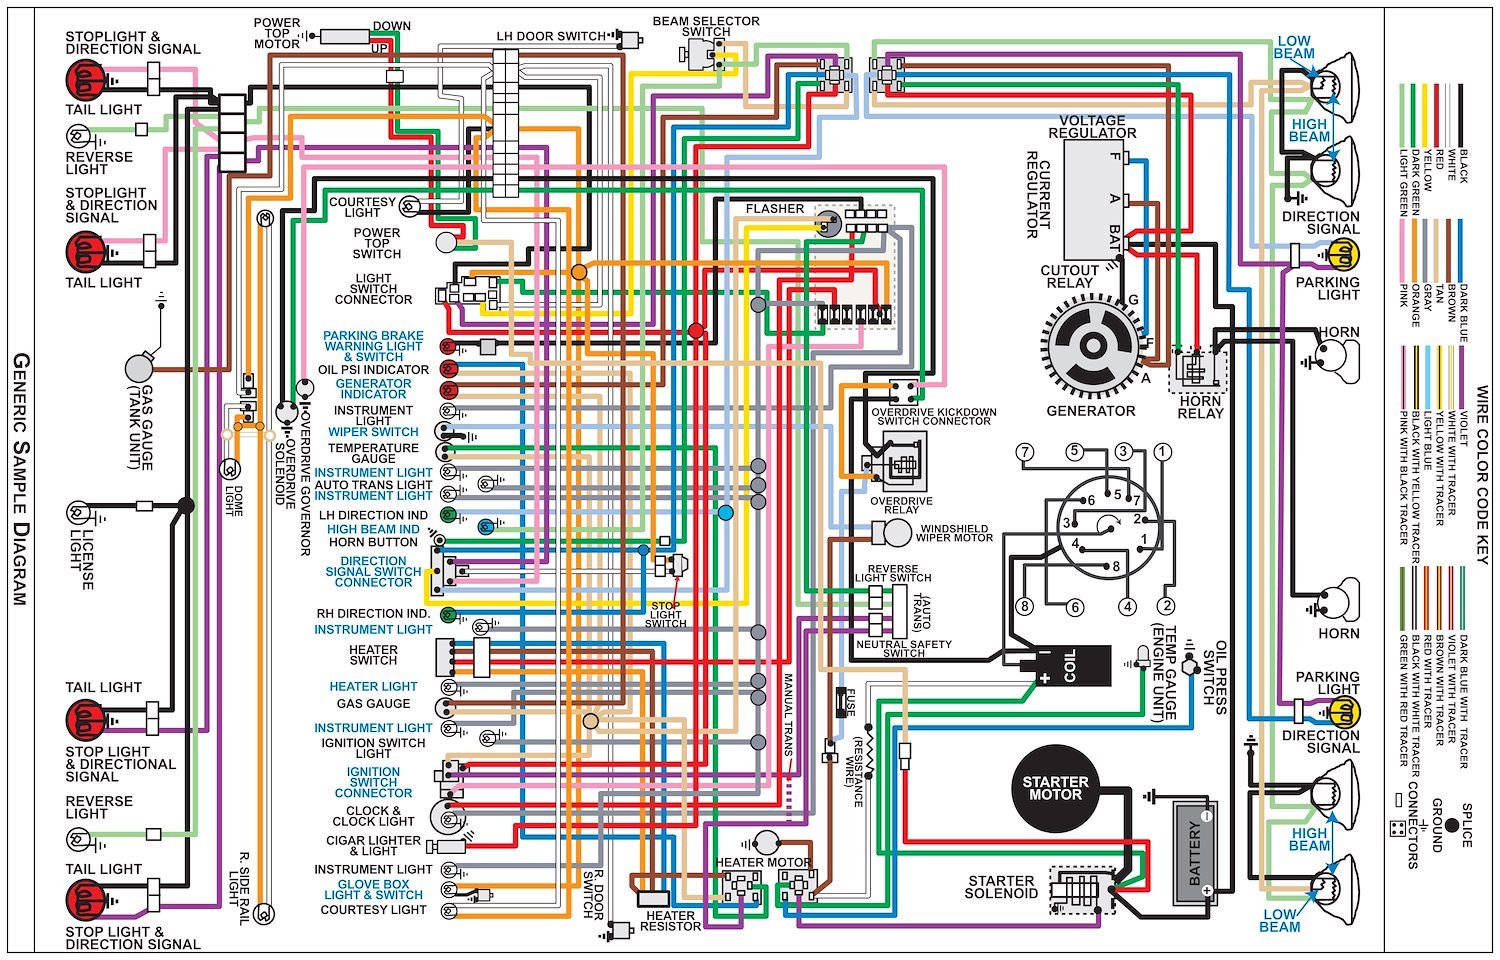 Wiring Diagram for 1968 Ford Falcon, 11 in x 17 in., Laminated